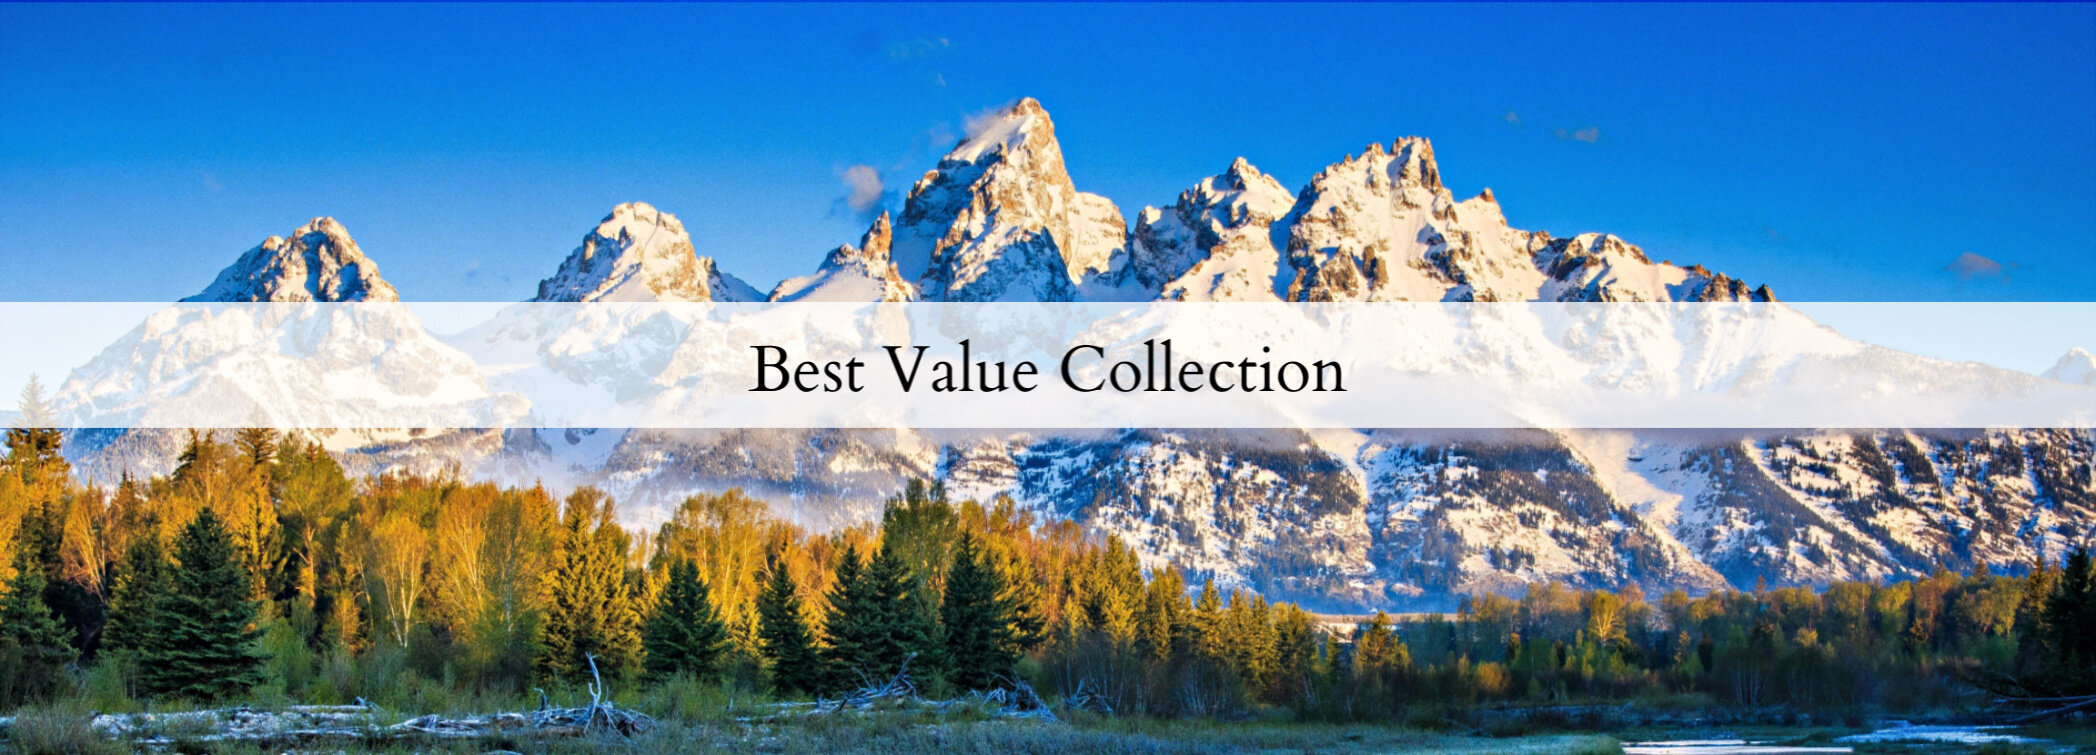 B. Best Value Collection mountains.jpg